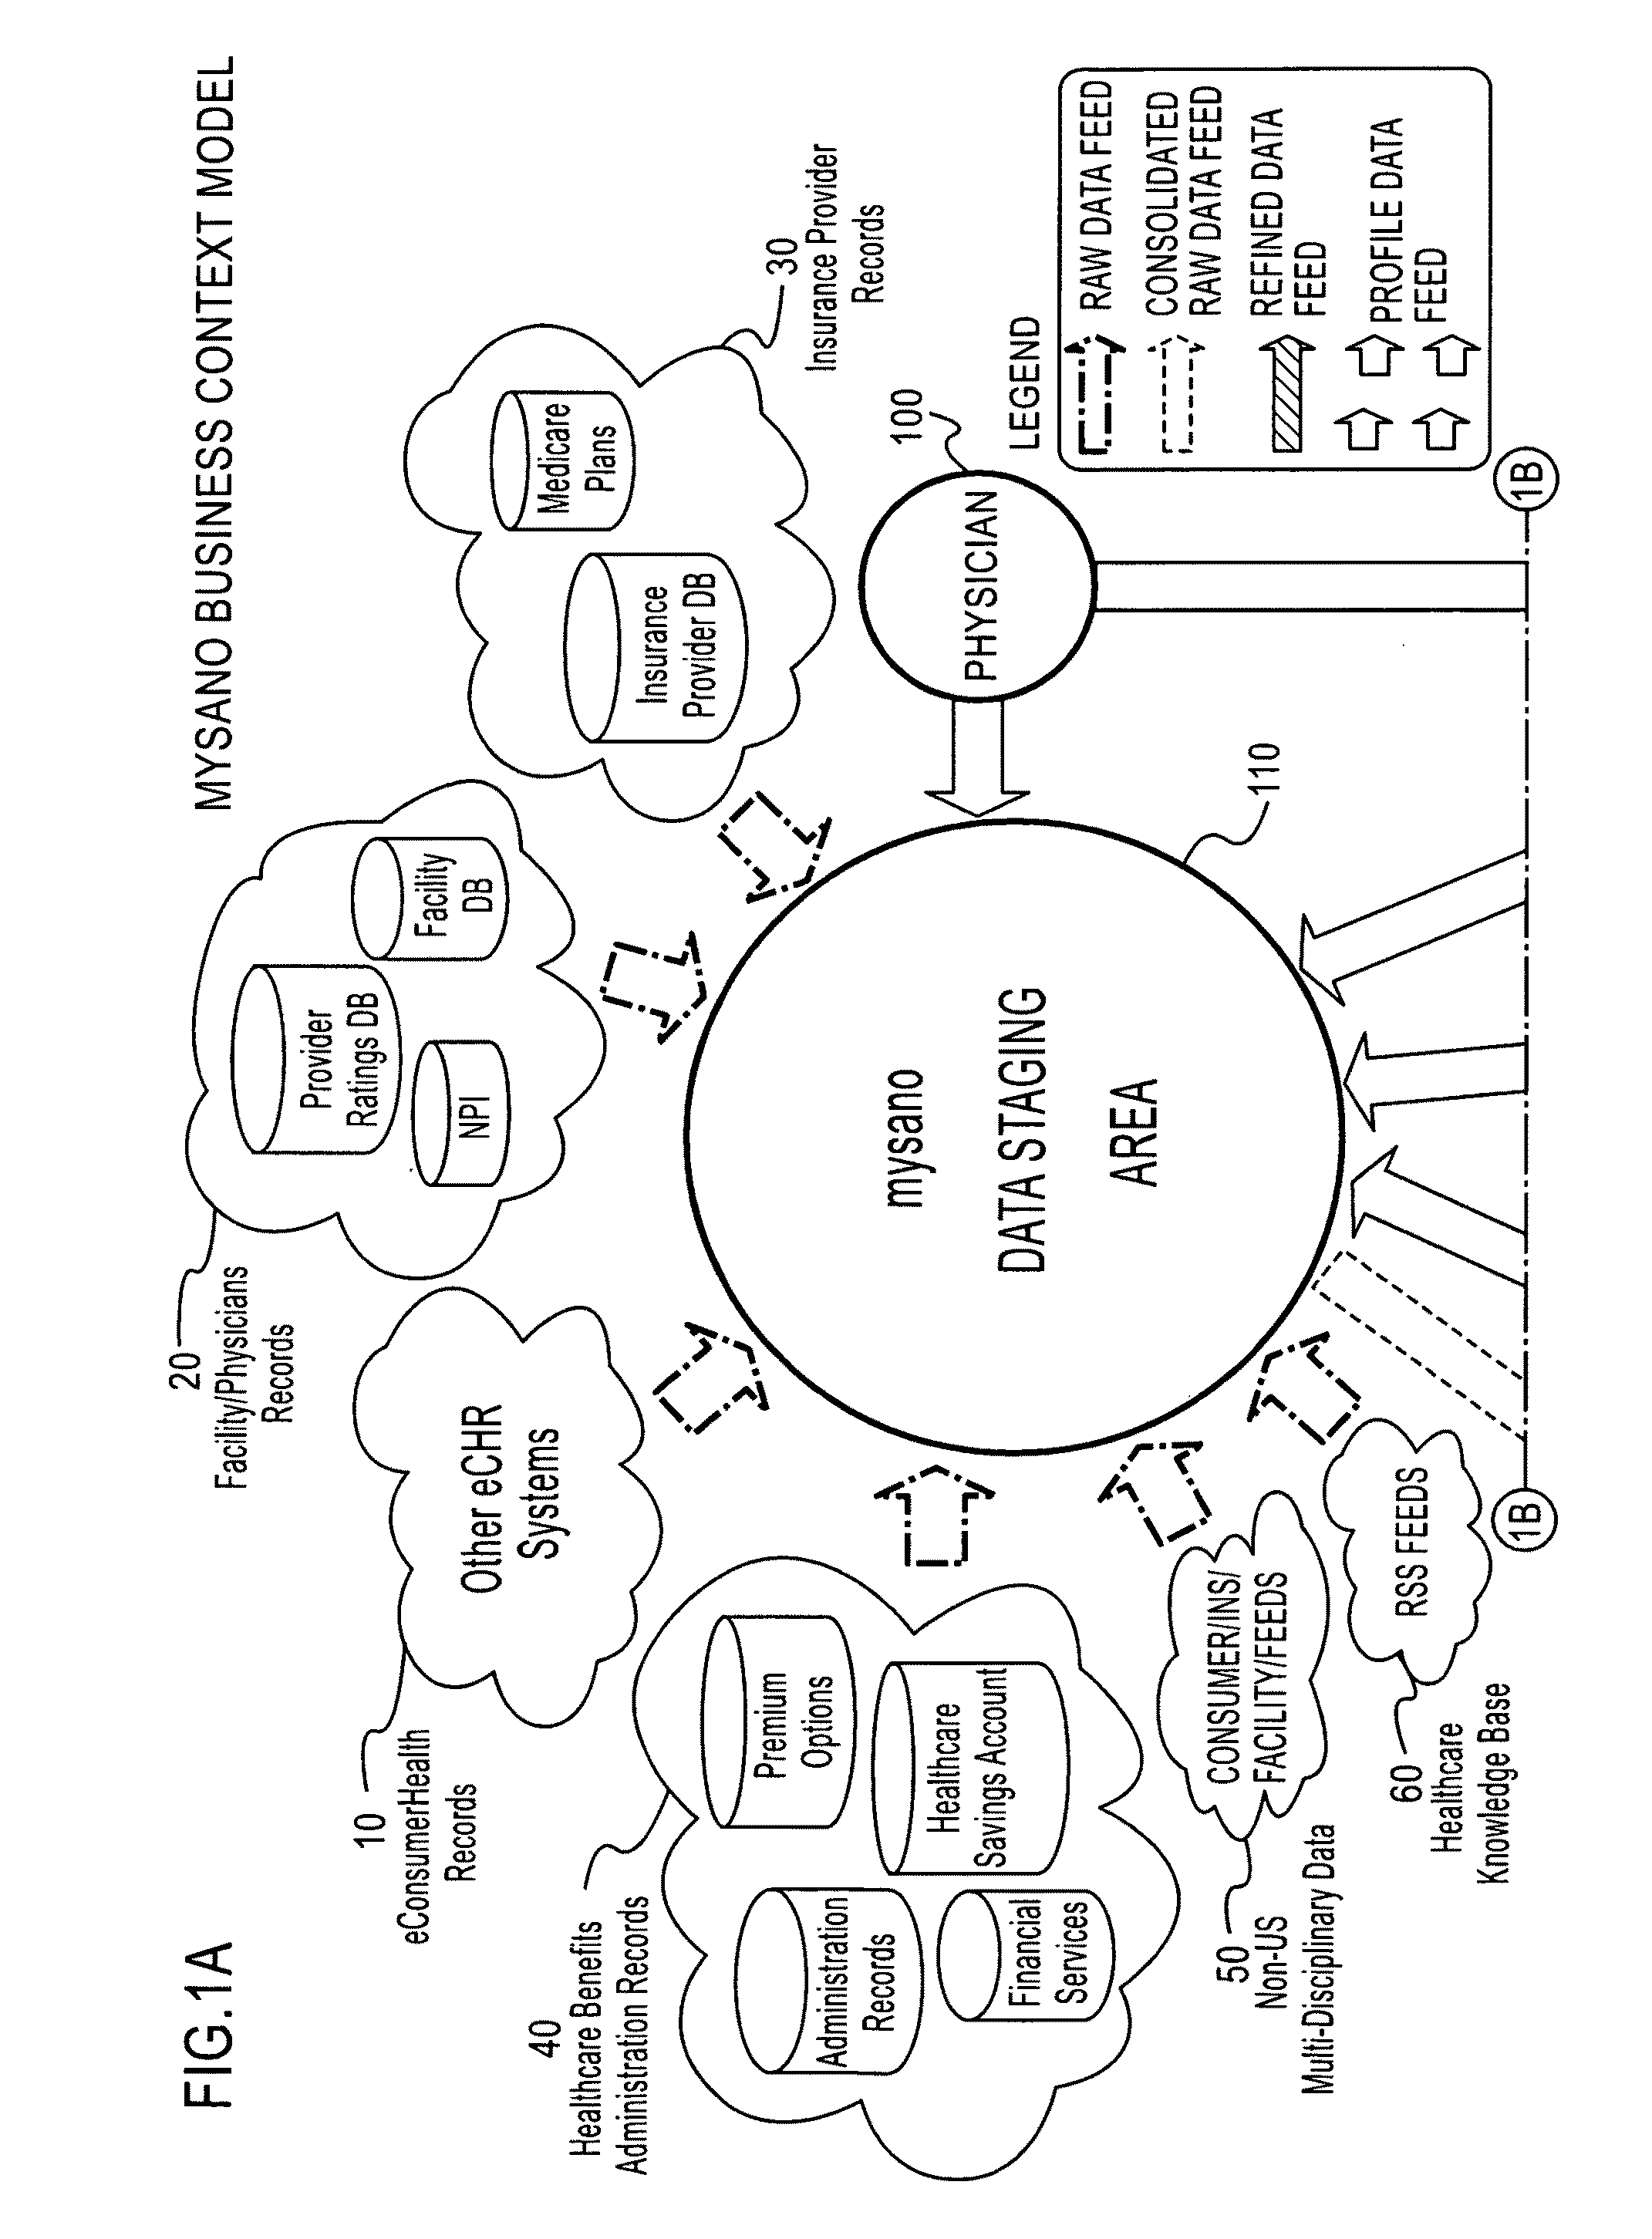 Apparatus, method and system for web-based health care marketplace portal